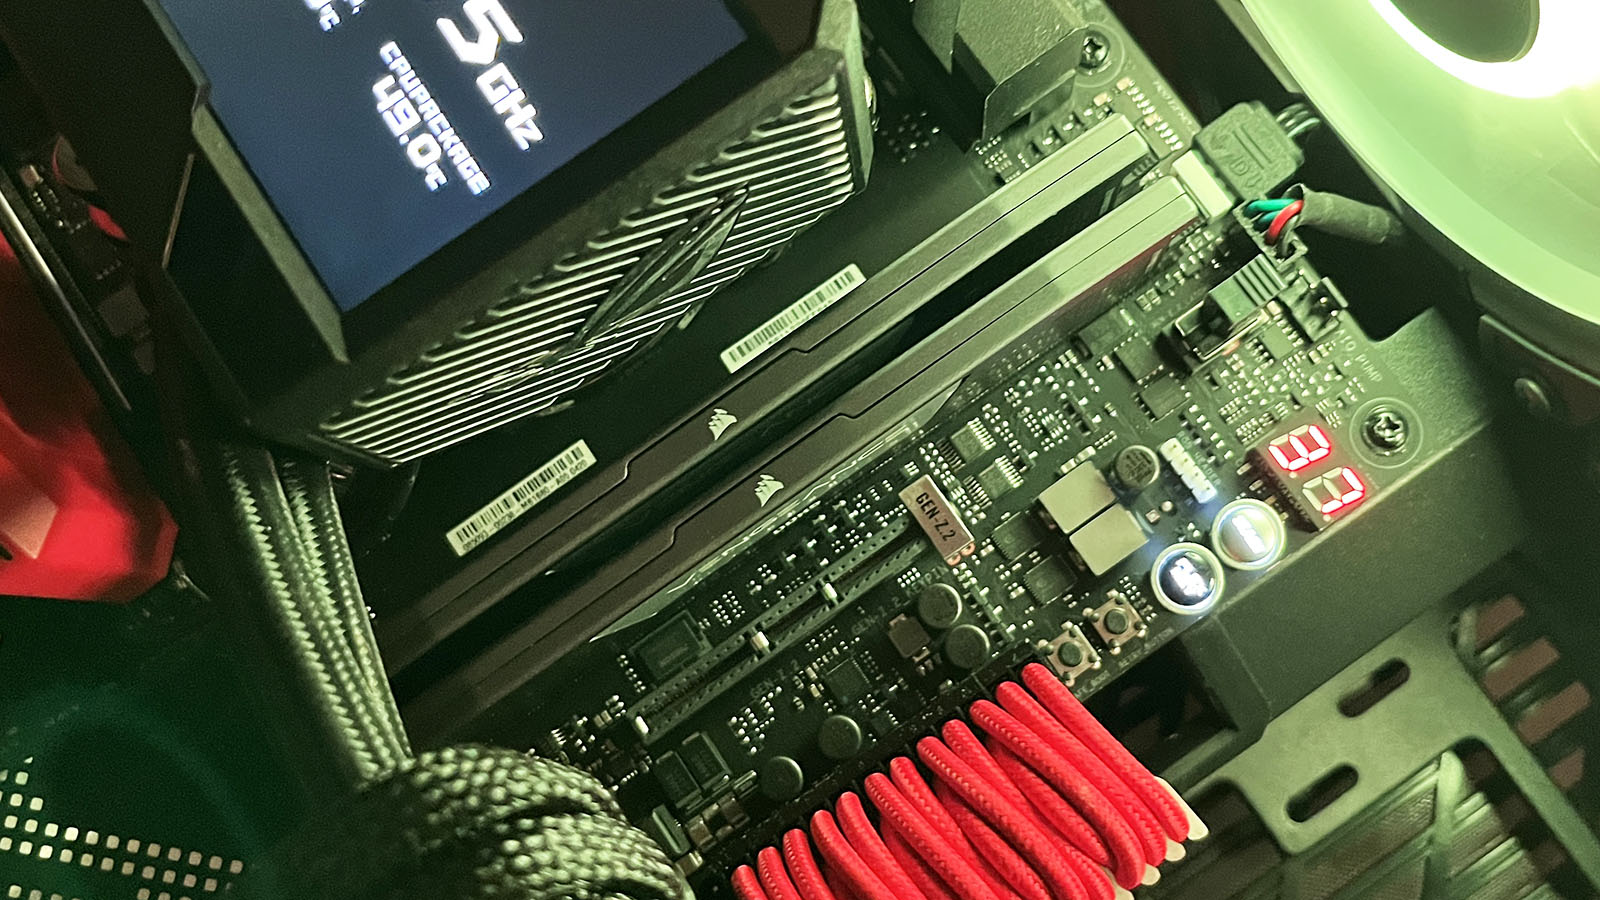 Overclock with Ease Using AMD EXPO and CORSAIR DDR5 Memory